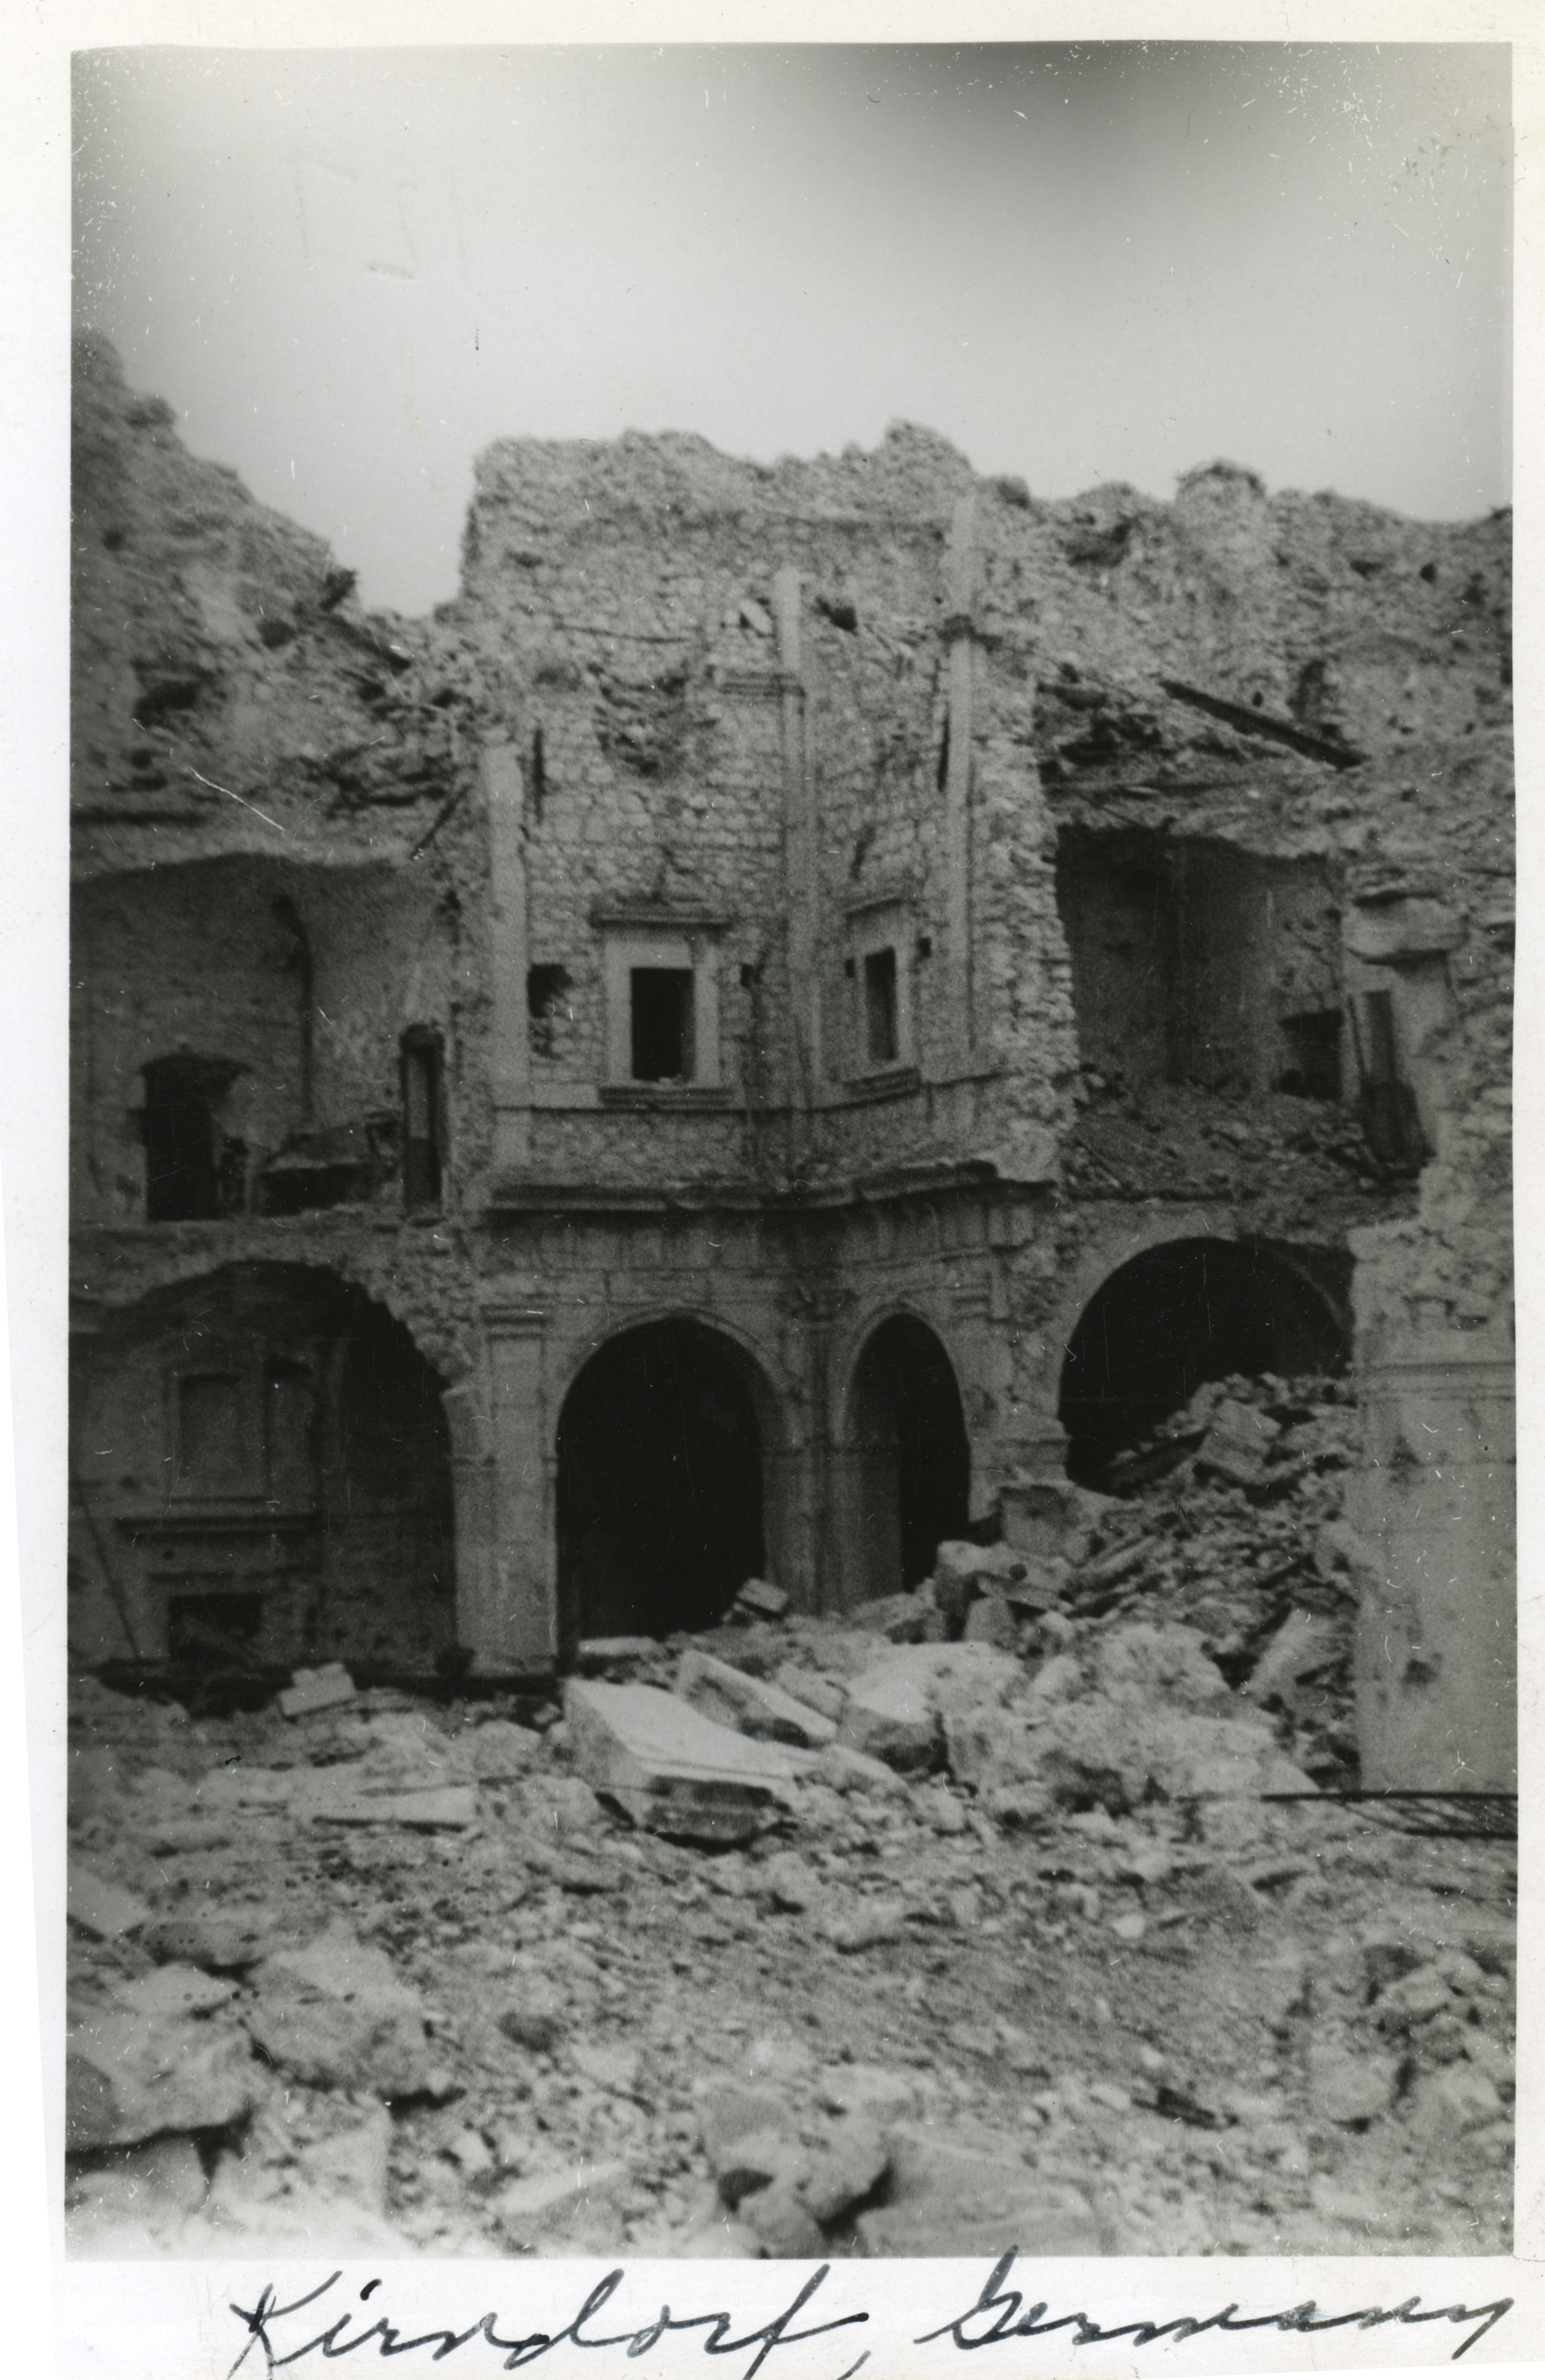 War damage in Kirndorf, Germany | The Digital Collections of the National WWII Museum : Oral ...